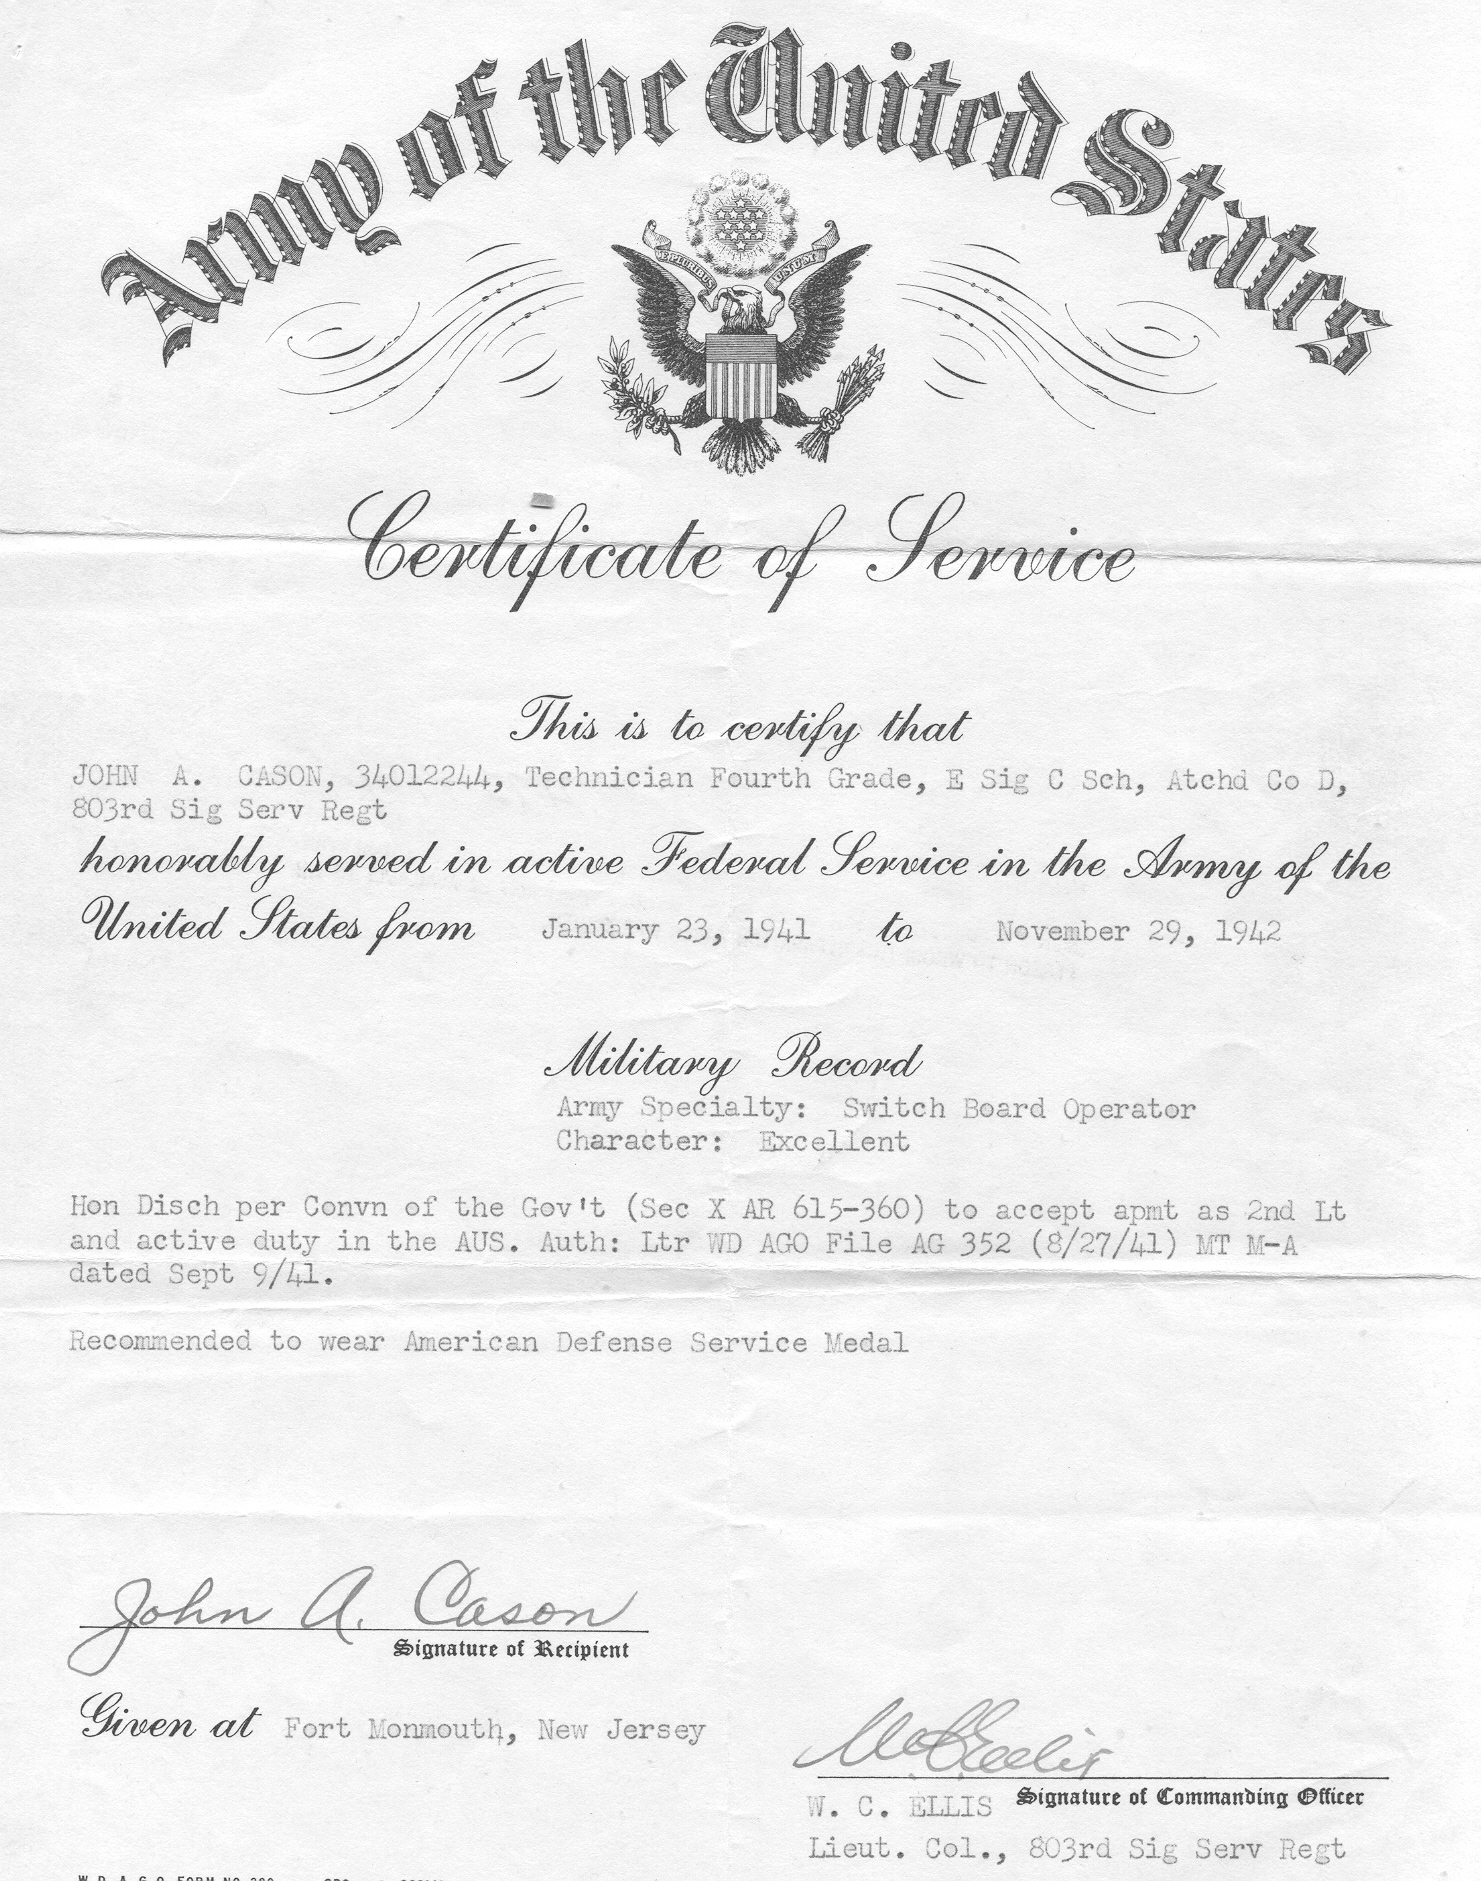 Certificate of Service issued prior to becoming a 2nd Lieutenant